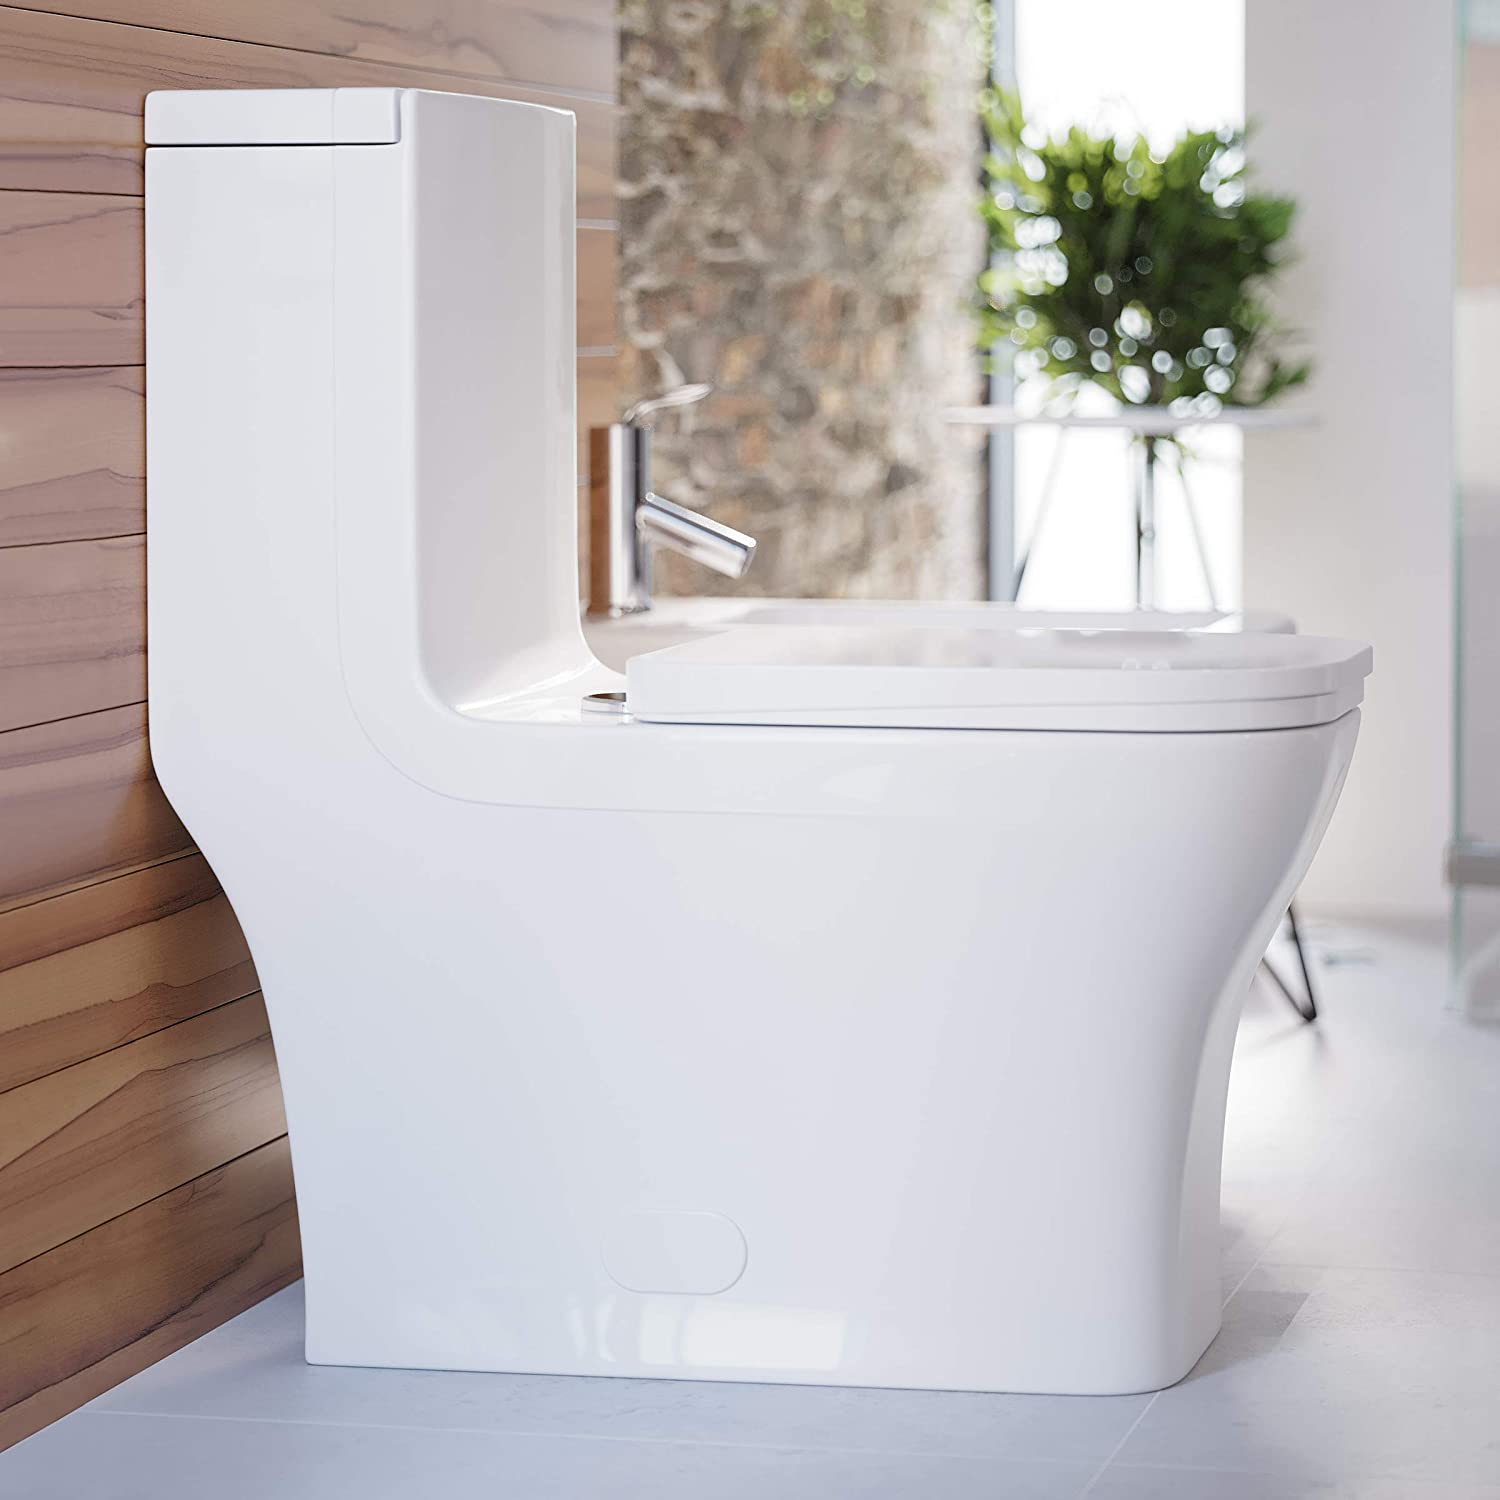 Swiss Madison SM-1T106 Concorde Square Toilet Dual Flush, Soft Closing Quick Release Seat Included, 0.8/1.28 Gpf.